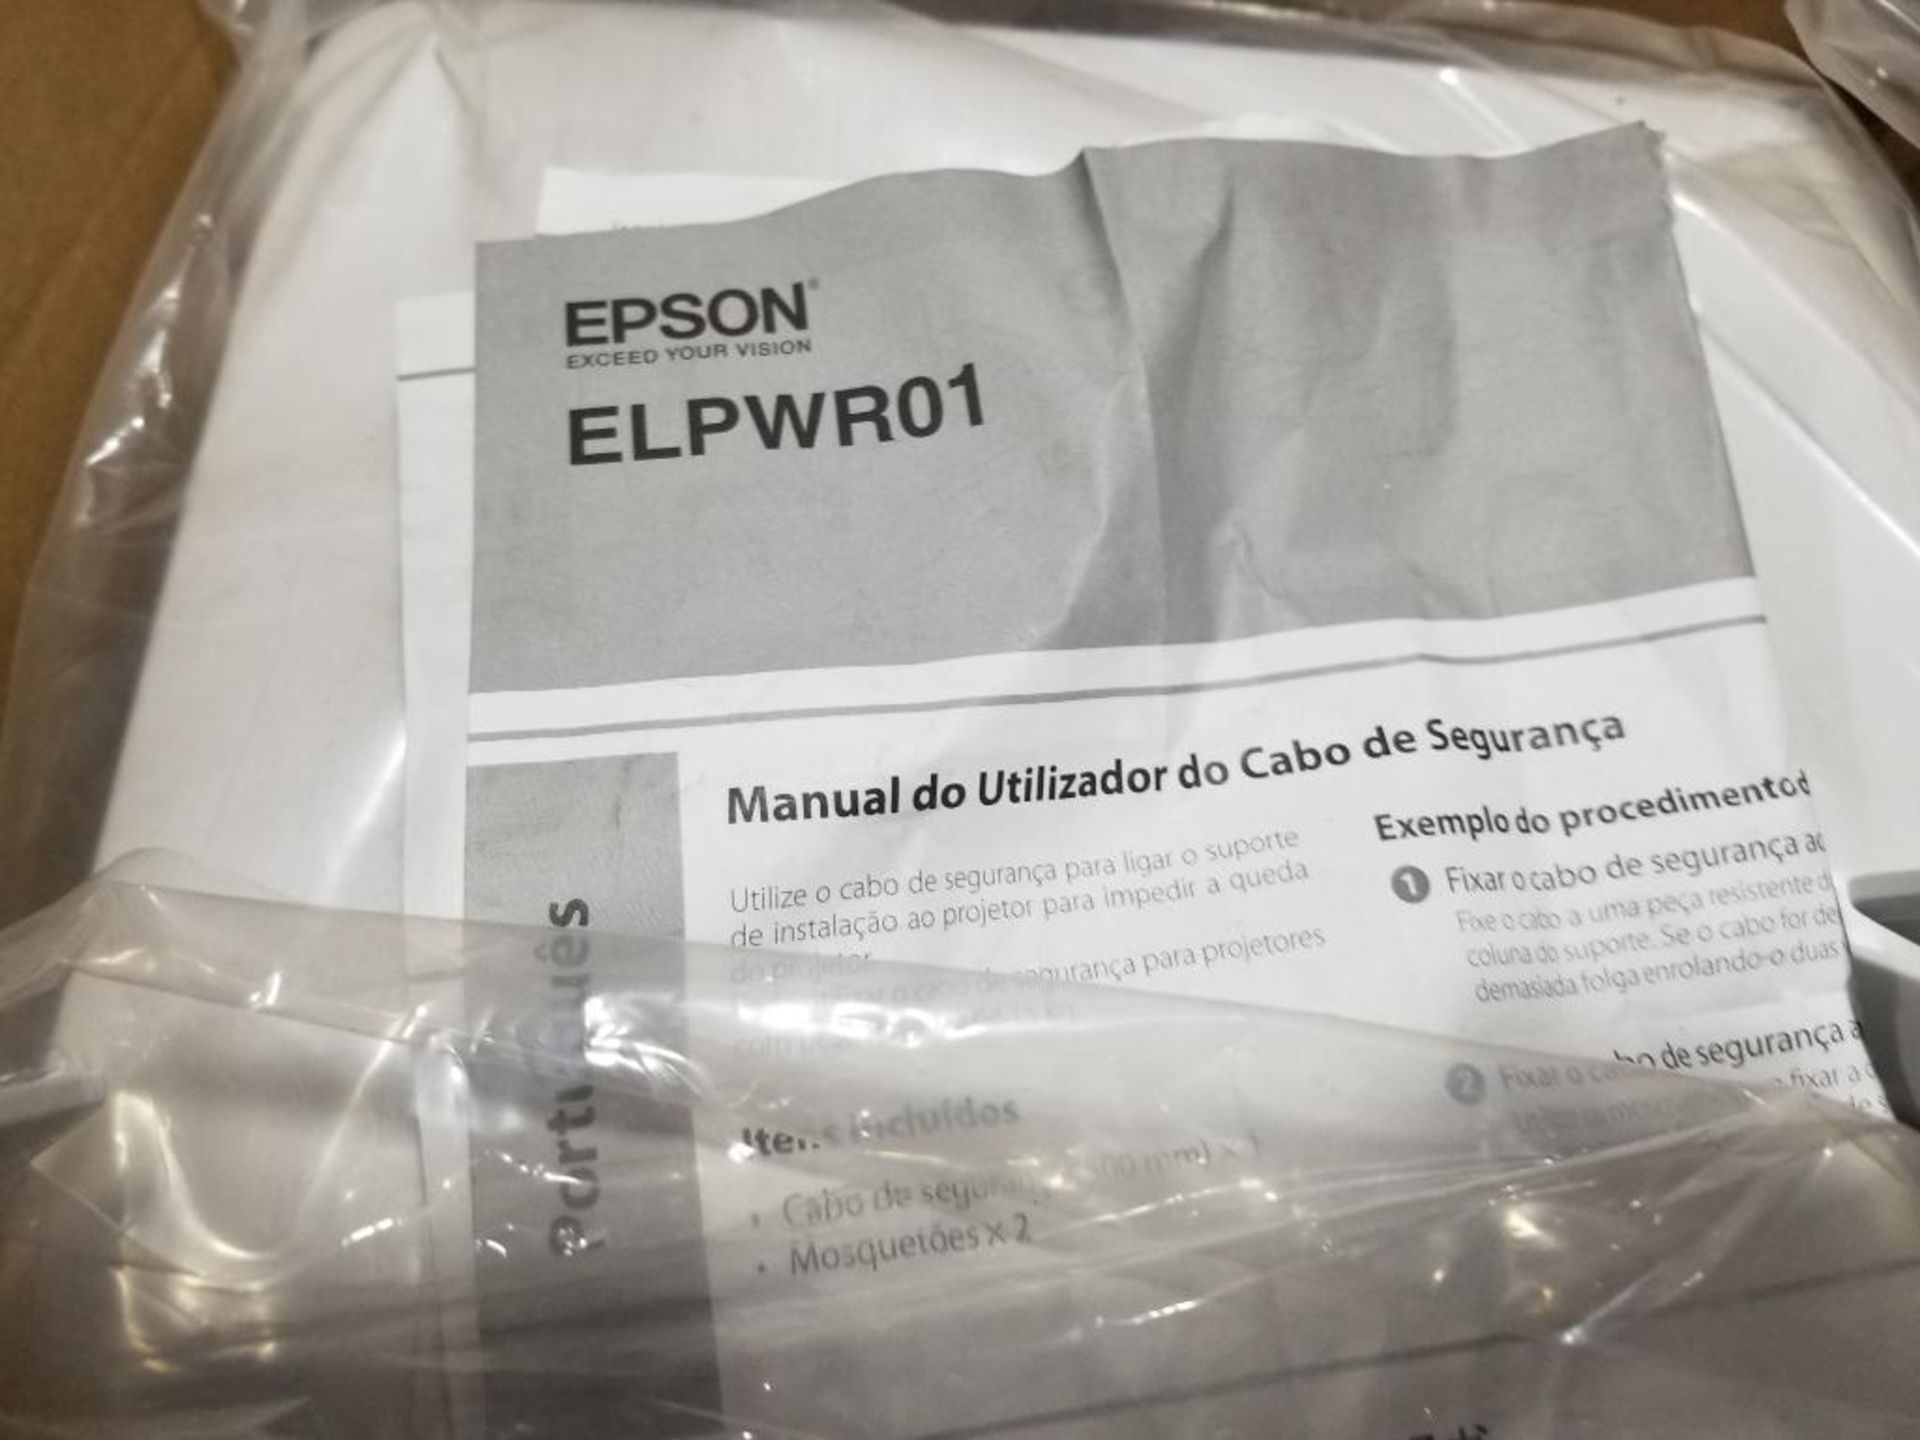 Epson ELPWR01 spare parts and accessories. - Image 2 of 5